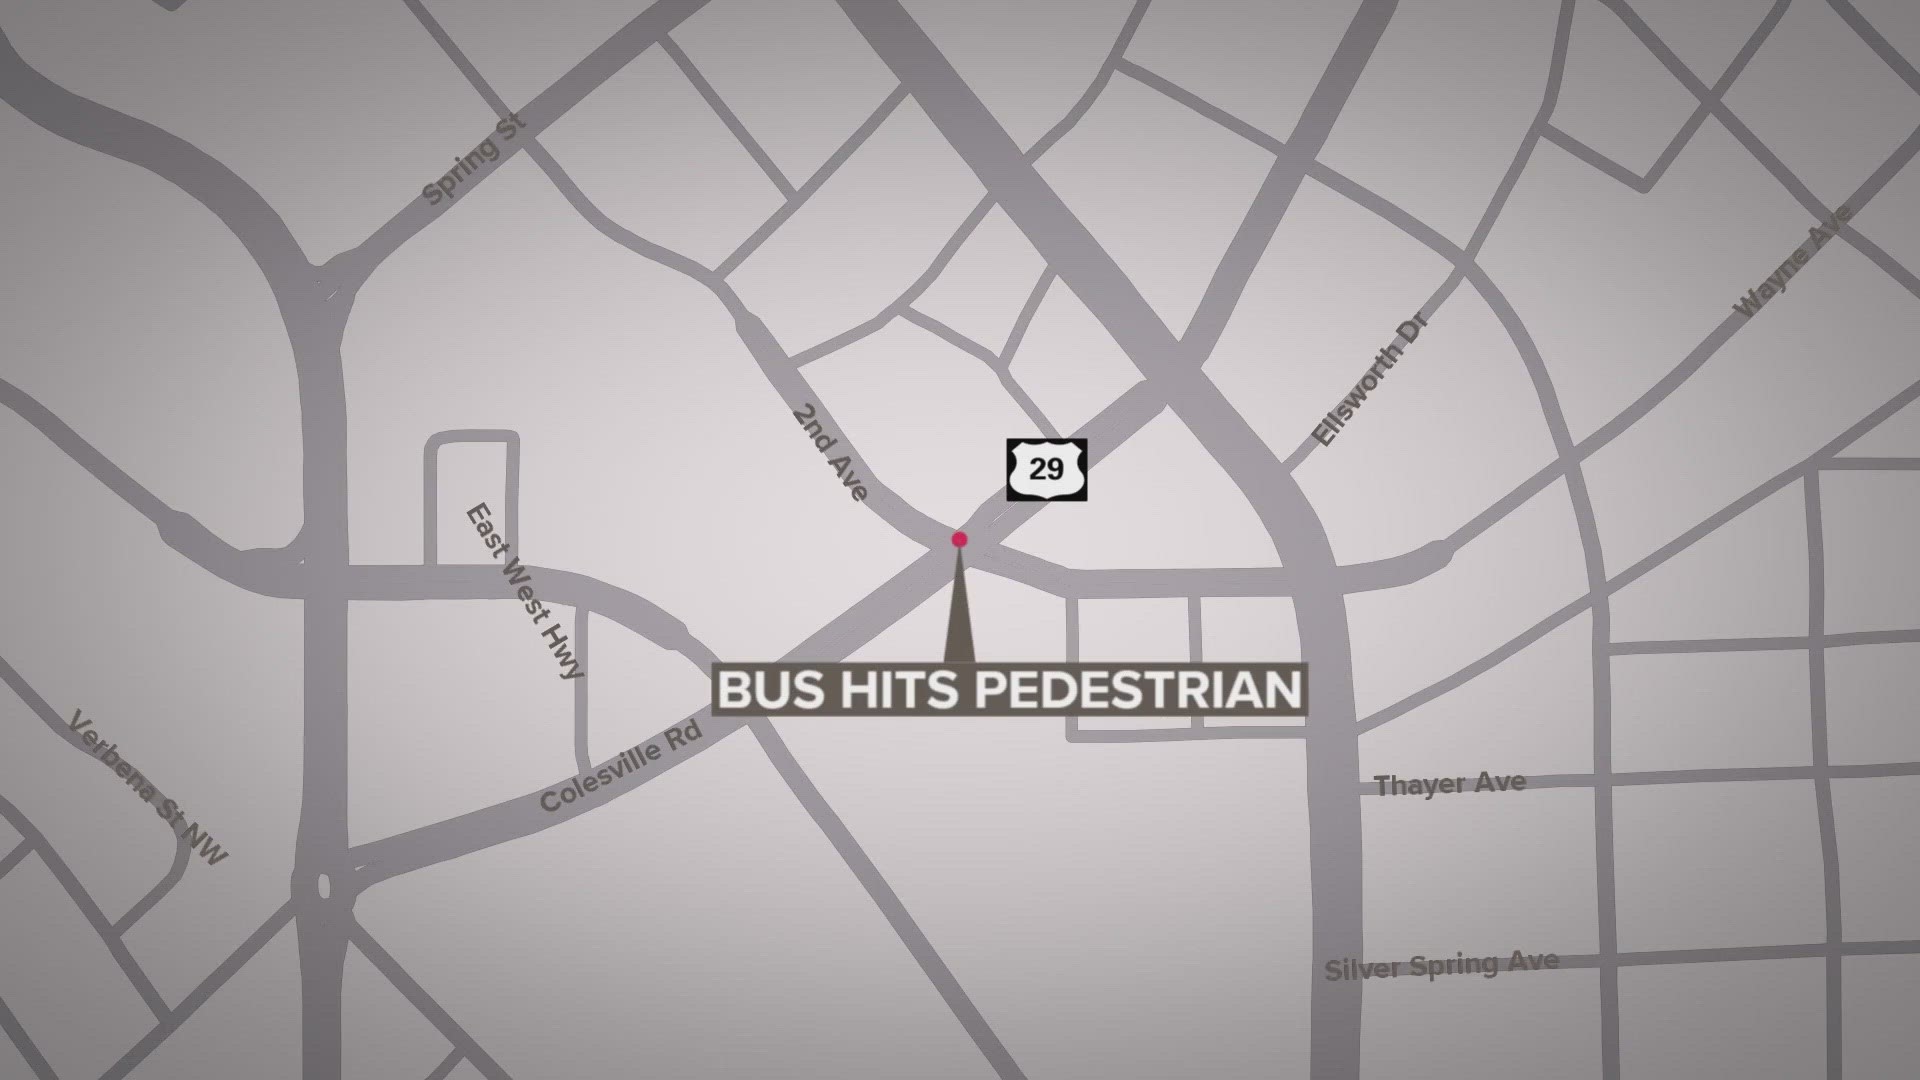 The crash happened around two this morning at the intersection of Second Avenue and Colesville Road. They say after the collision, the bus left the scene.